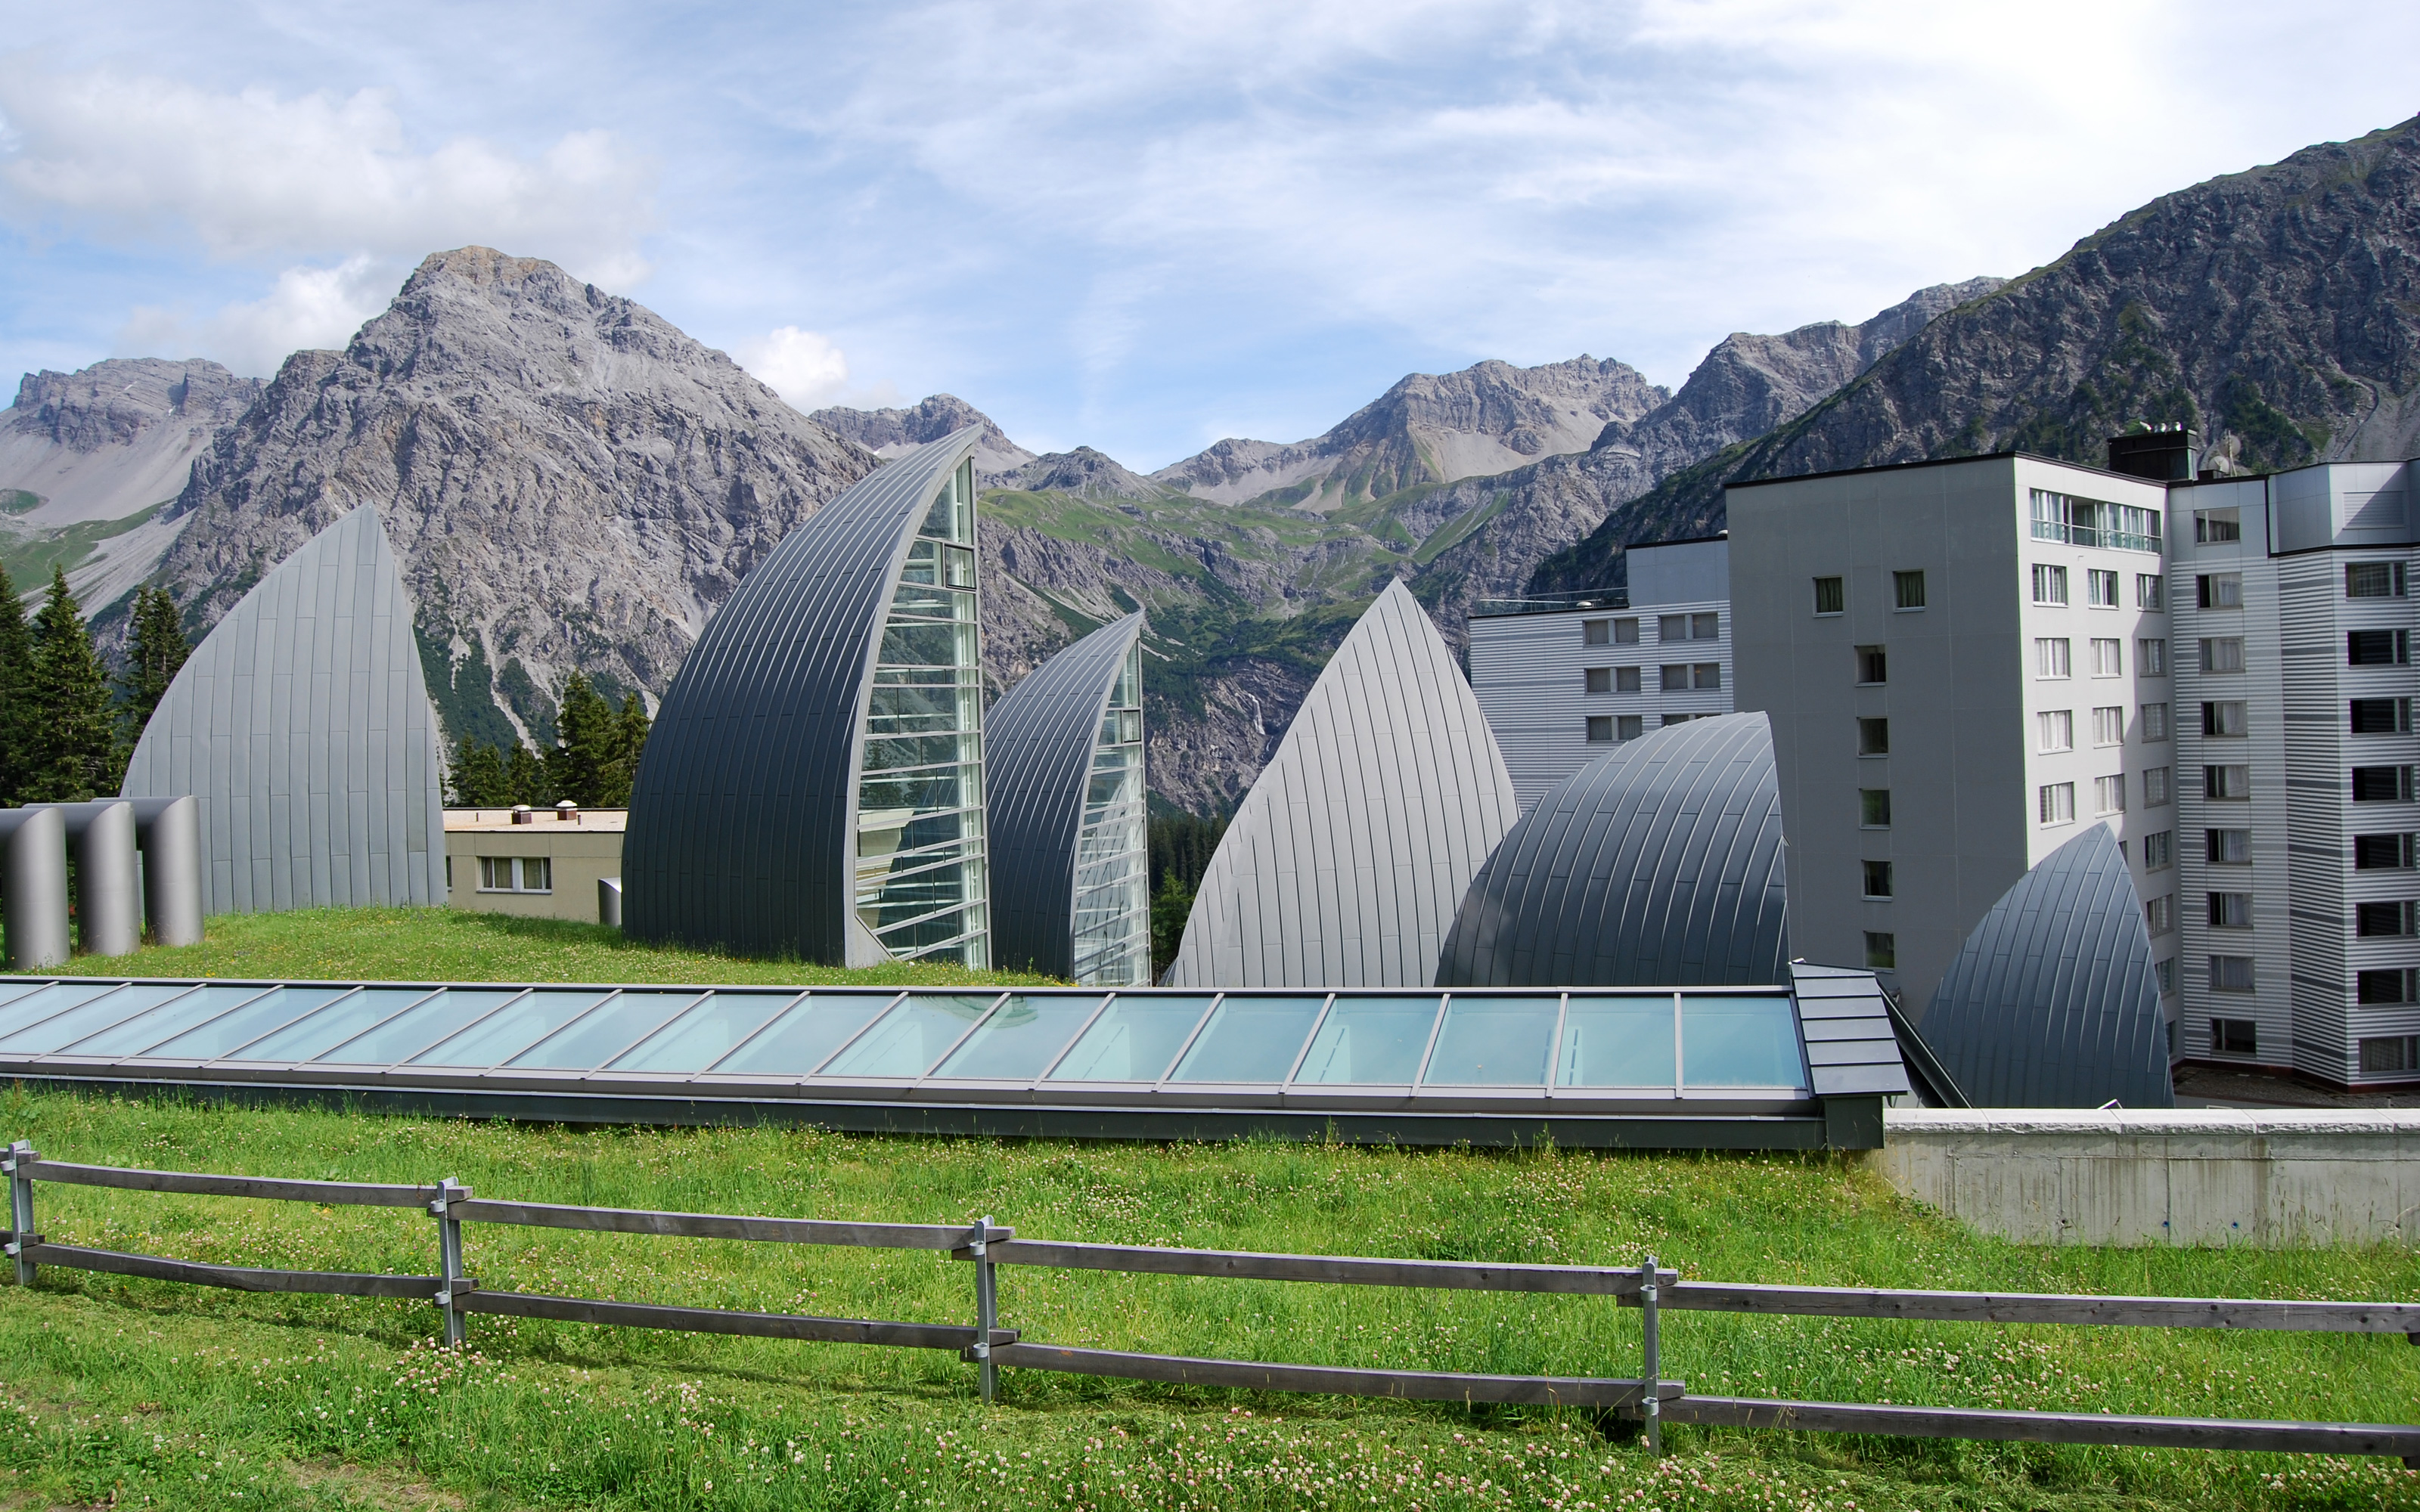 Sail-shaped skylights on a green roof in front of mountains